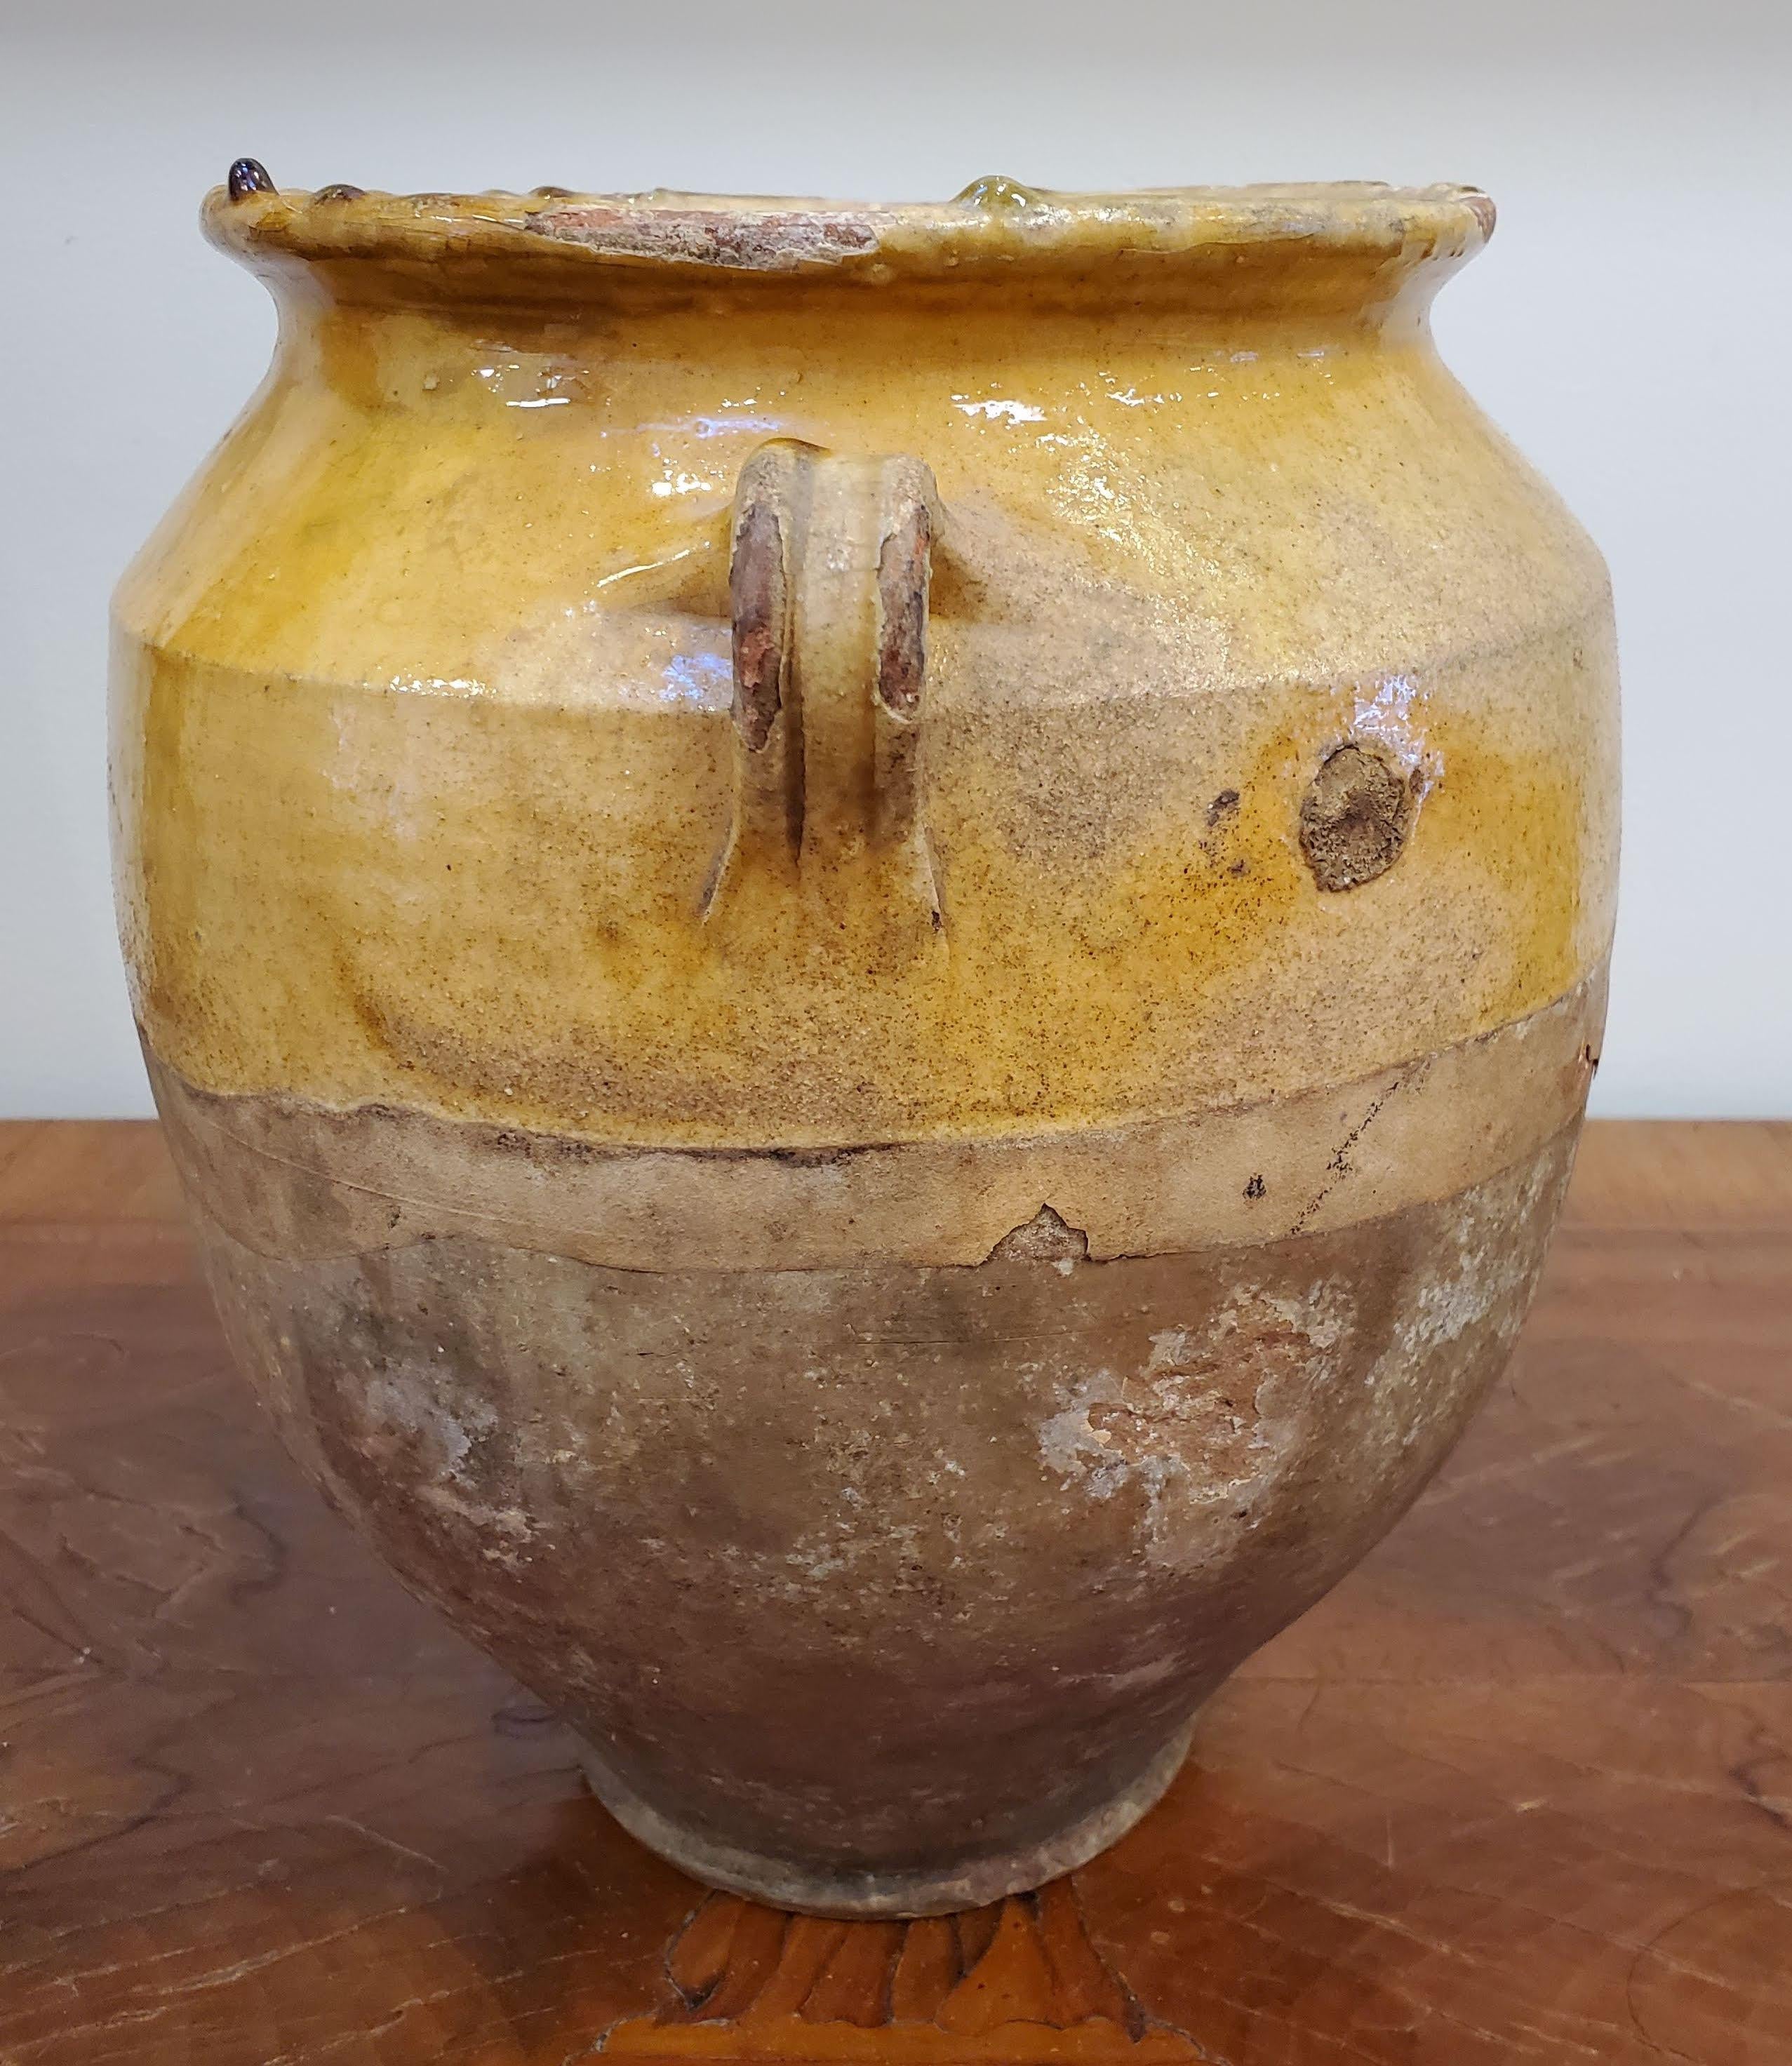 French Provincial Terra Cotta “Confit” Pot. Yellow glazed. Once a staple in French kitchens, confit pots were popular to preserve and cook duck before refrigeration existed. They are also the featured vase in Van Gogh's Sunflower series. 
Southern